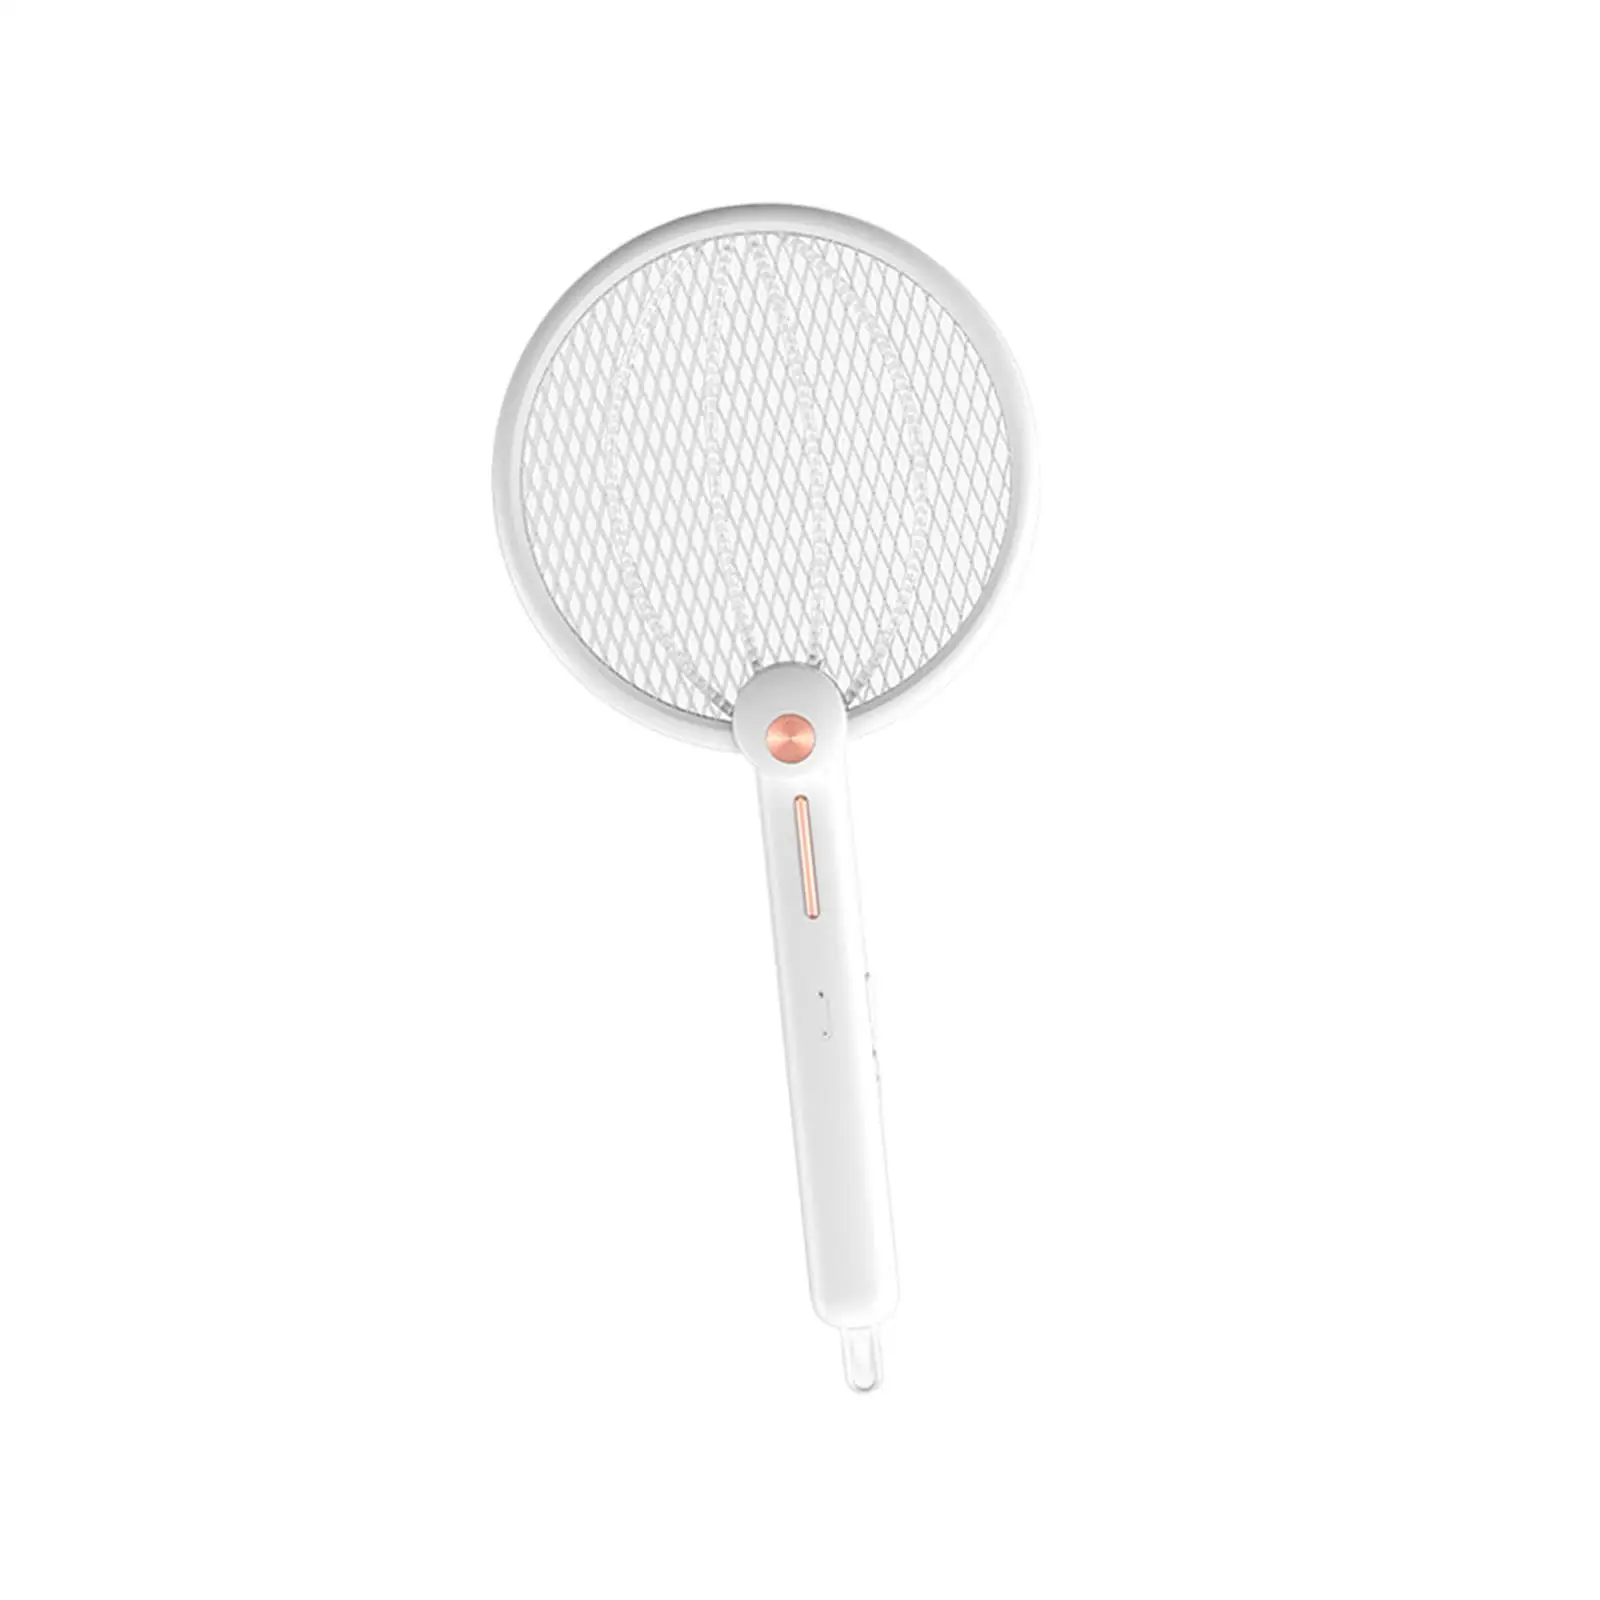 Fly Swatter with 3 mesh 2 in 1 Folding USB Handheld Standing Bug Zapping Racket for Camping Household Office Home Outdoor